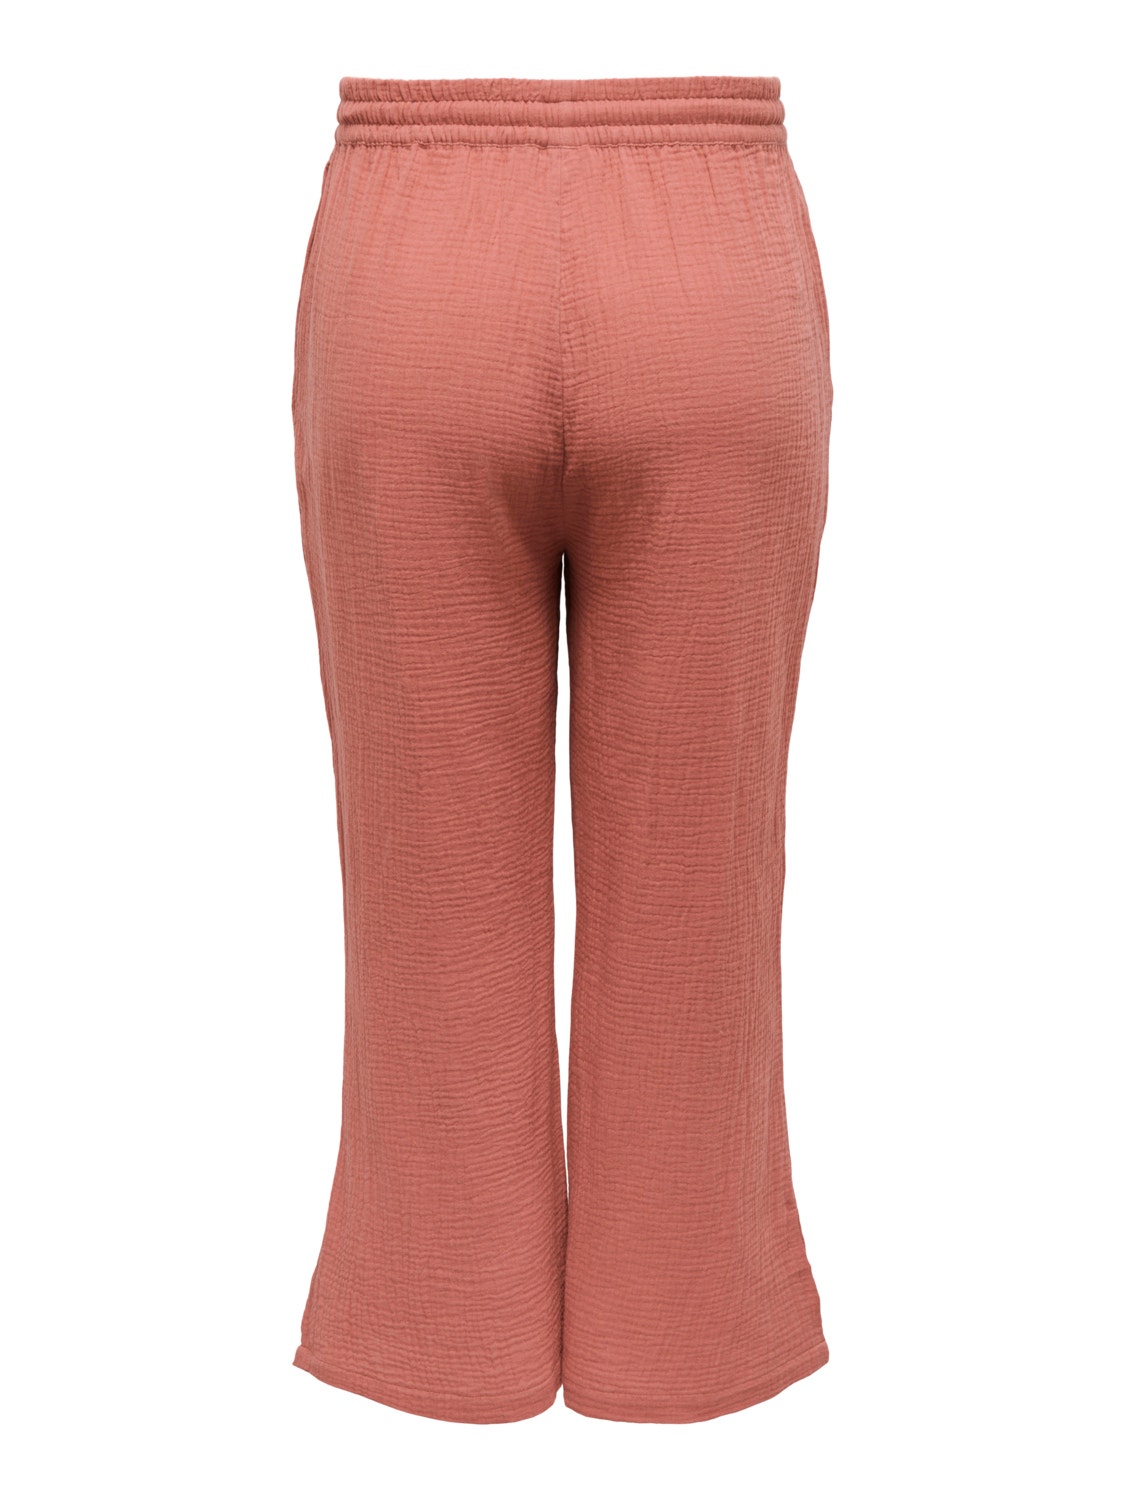 ONLY Curvy flared cotton trousers -Canyon Rose - 15296932